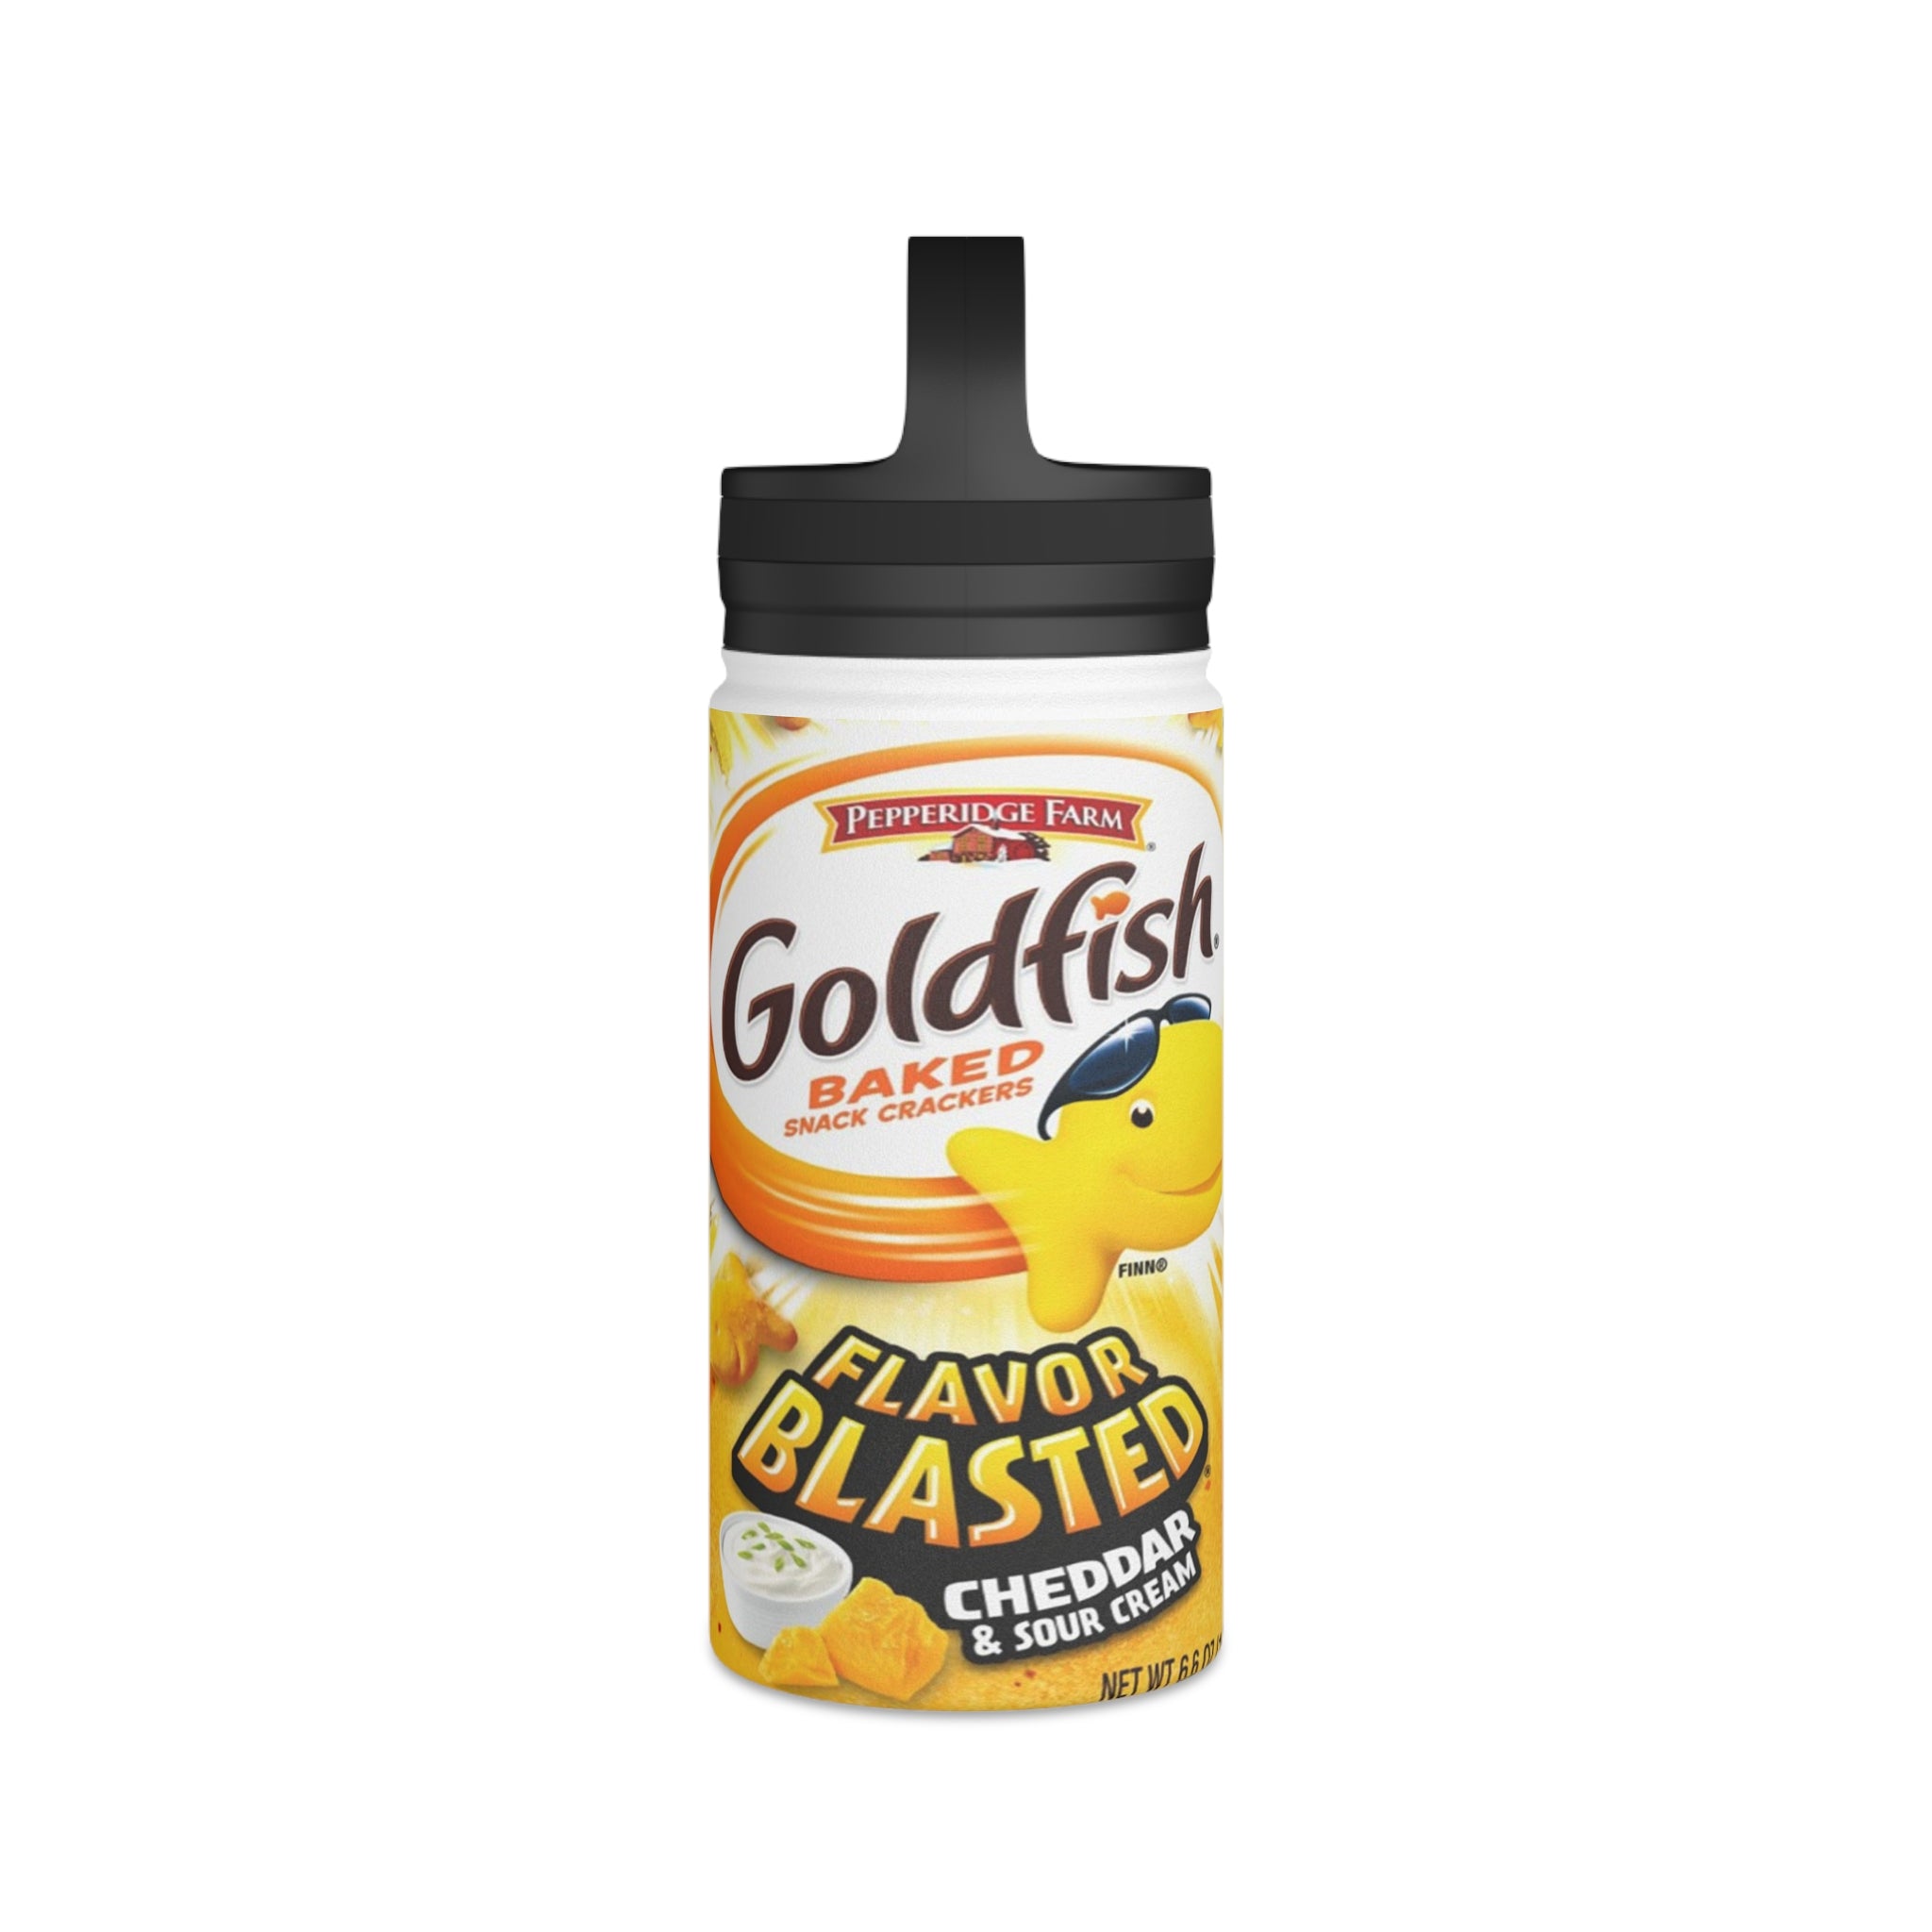 Goldfish Flavor Blasted Cheddar & Sour Cream Stainless Steel Water Bottle, Handle Lid